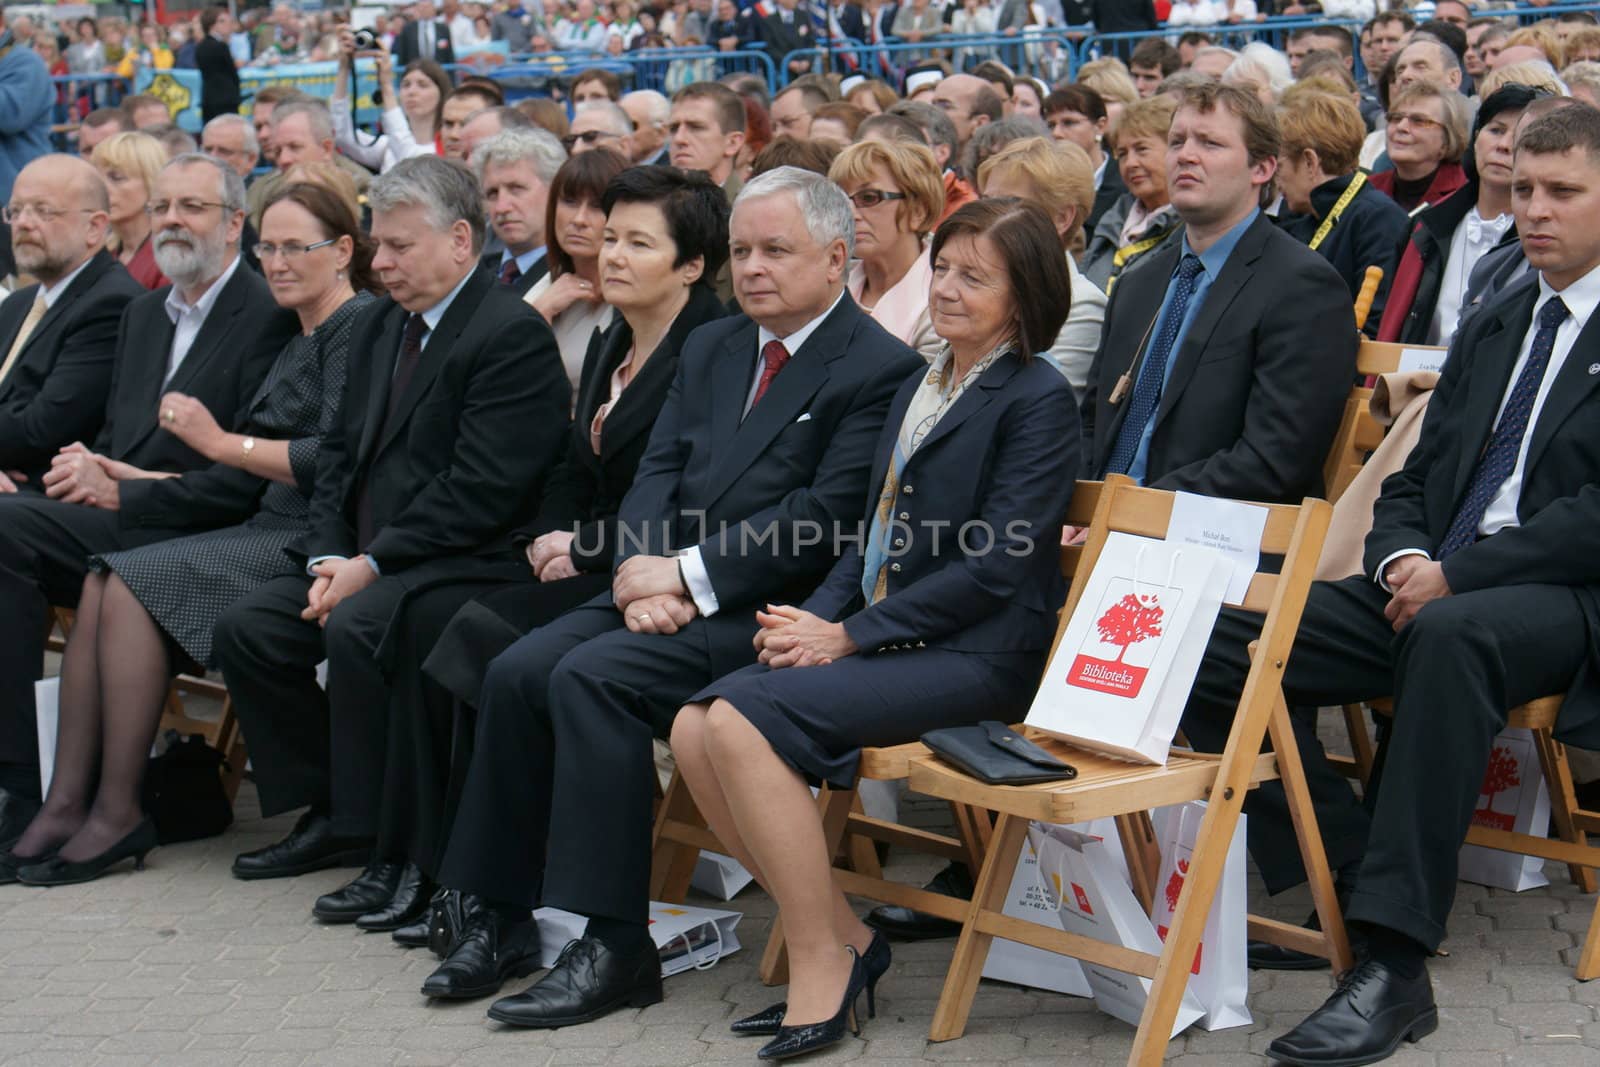 Warszaw, Poland - June 06: President of Poland Lech Kaczynski in Pi?sudzkiego square on the Cross devotion Pope John  Paul II in the 20th anniversary of the Polish pope. About the pilgrimage: "Let your spirit come down and renew the  face of the earth"